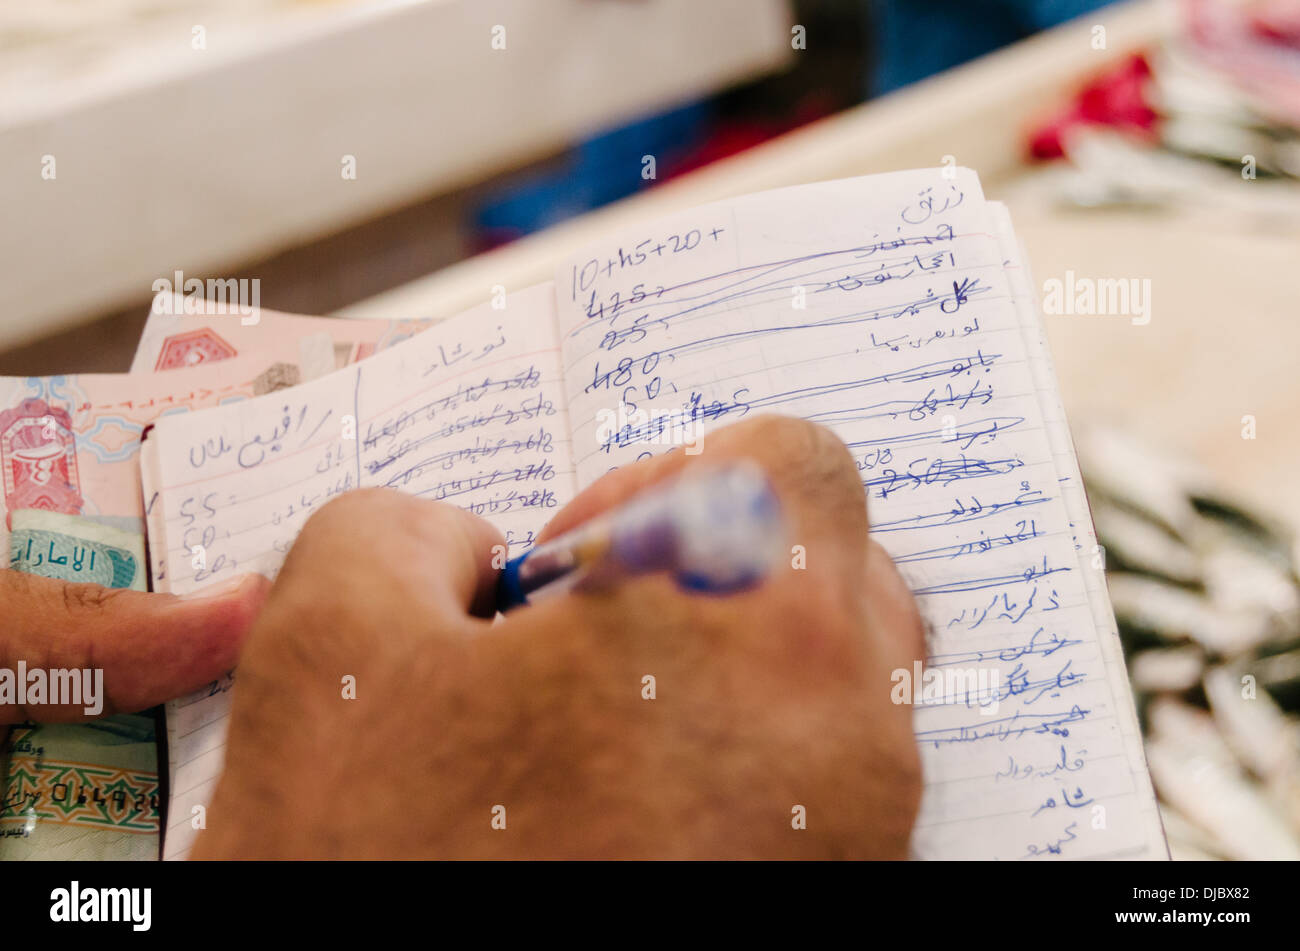 Vendor scribbles some notes on his notebook to record transactions at Deira Fish Market. Dubai, United Arab Emirates. Stock Photo